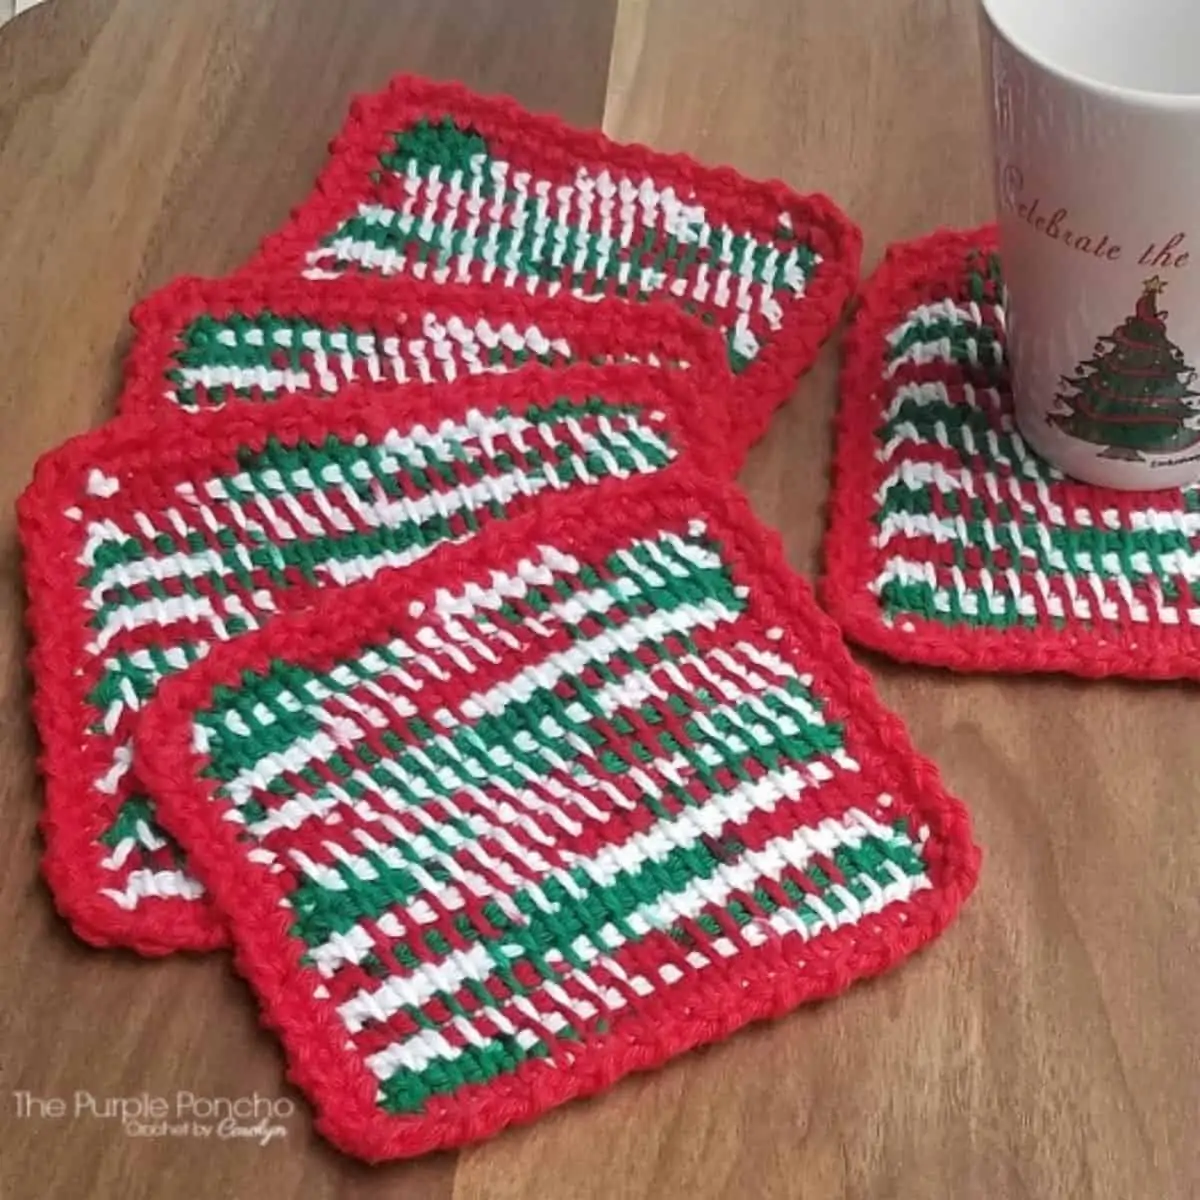 striped green red and white crochet coasters with a coffee mug on one coaster